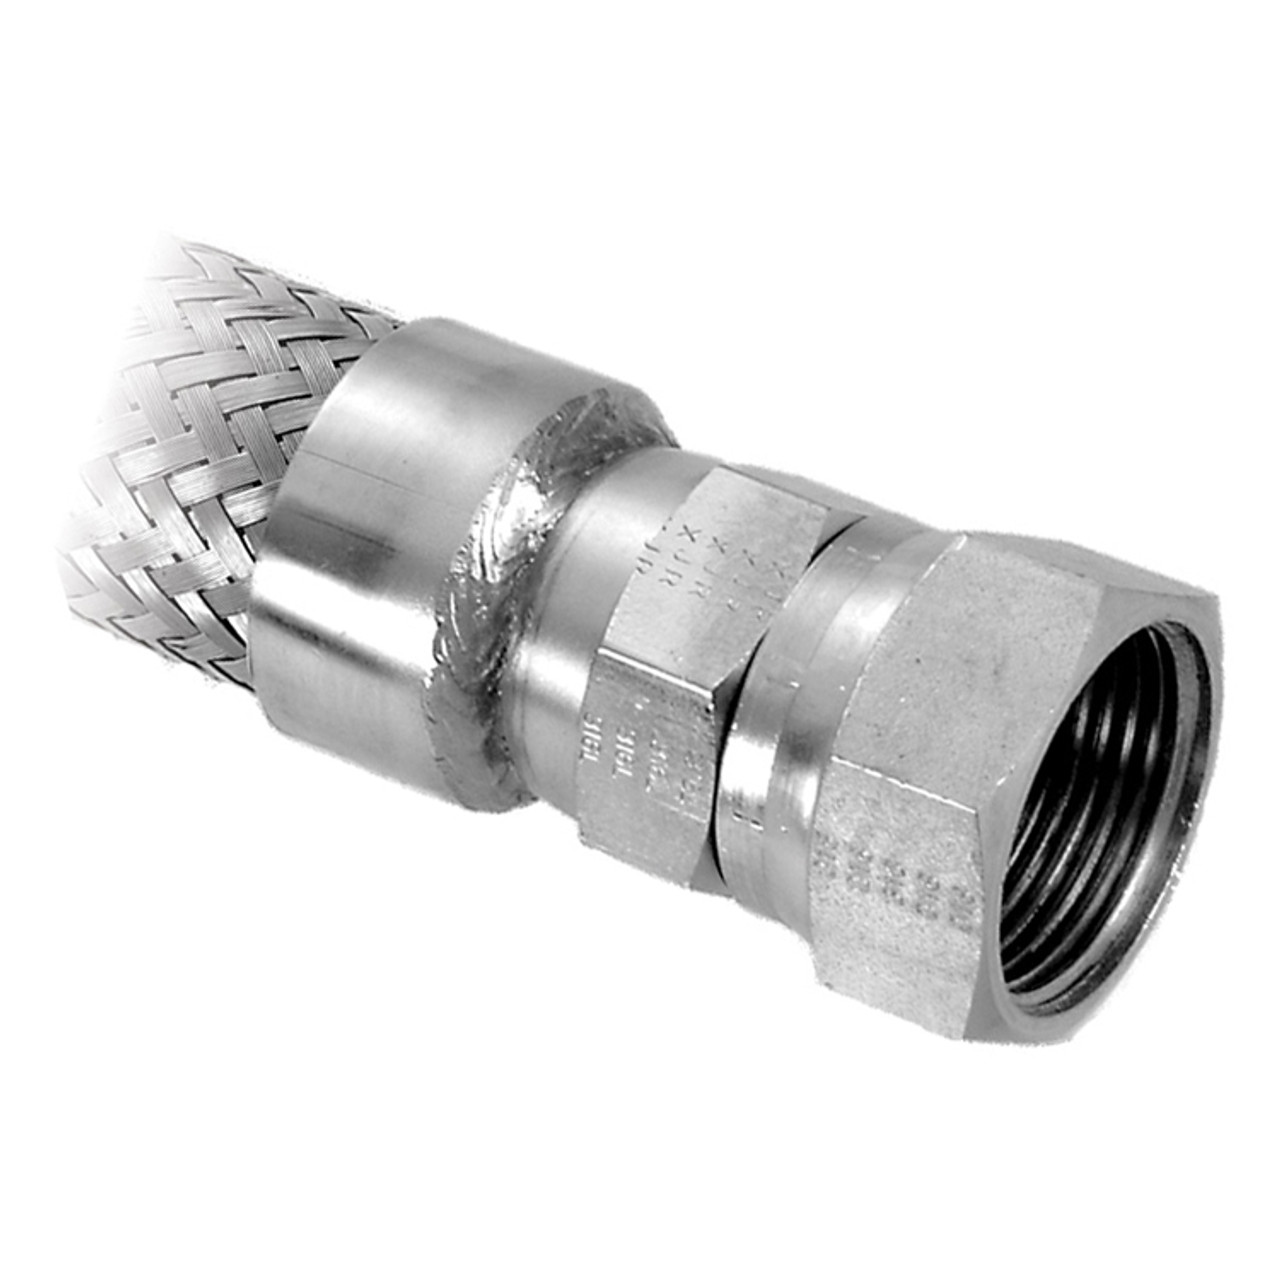 1-1/4 x 1-1/4" x 12" Stainless Steel Hose Assembly CSA w/ Female JIC Ends   G521CSA-125JJ-12